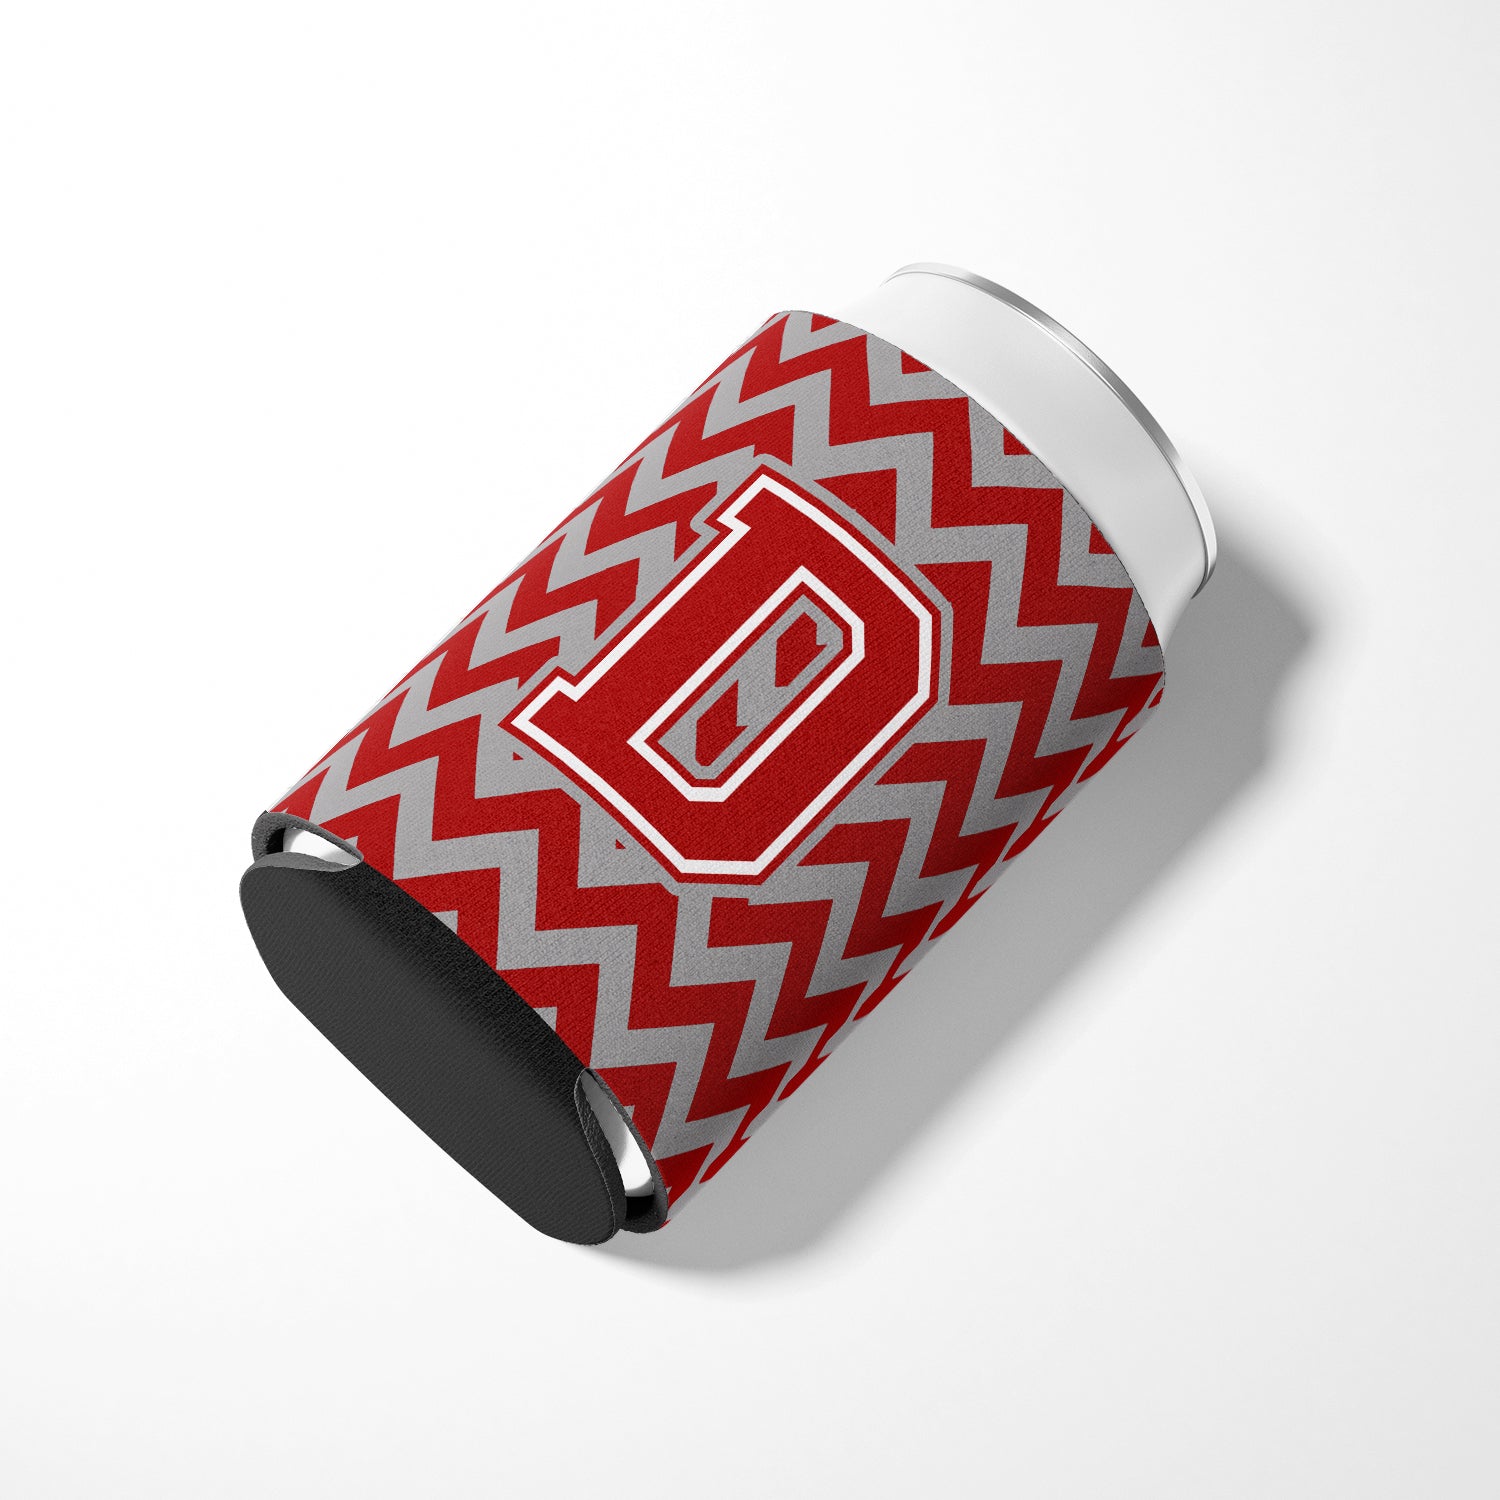 Letter D Chevron Maroon and White Can or Bottle Hugger CJ1049-DCC.